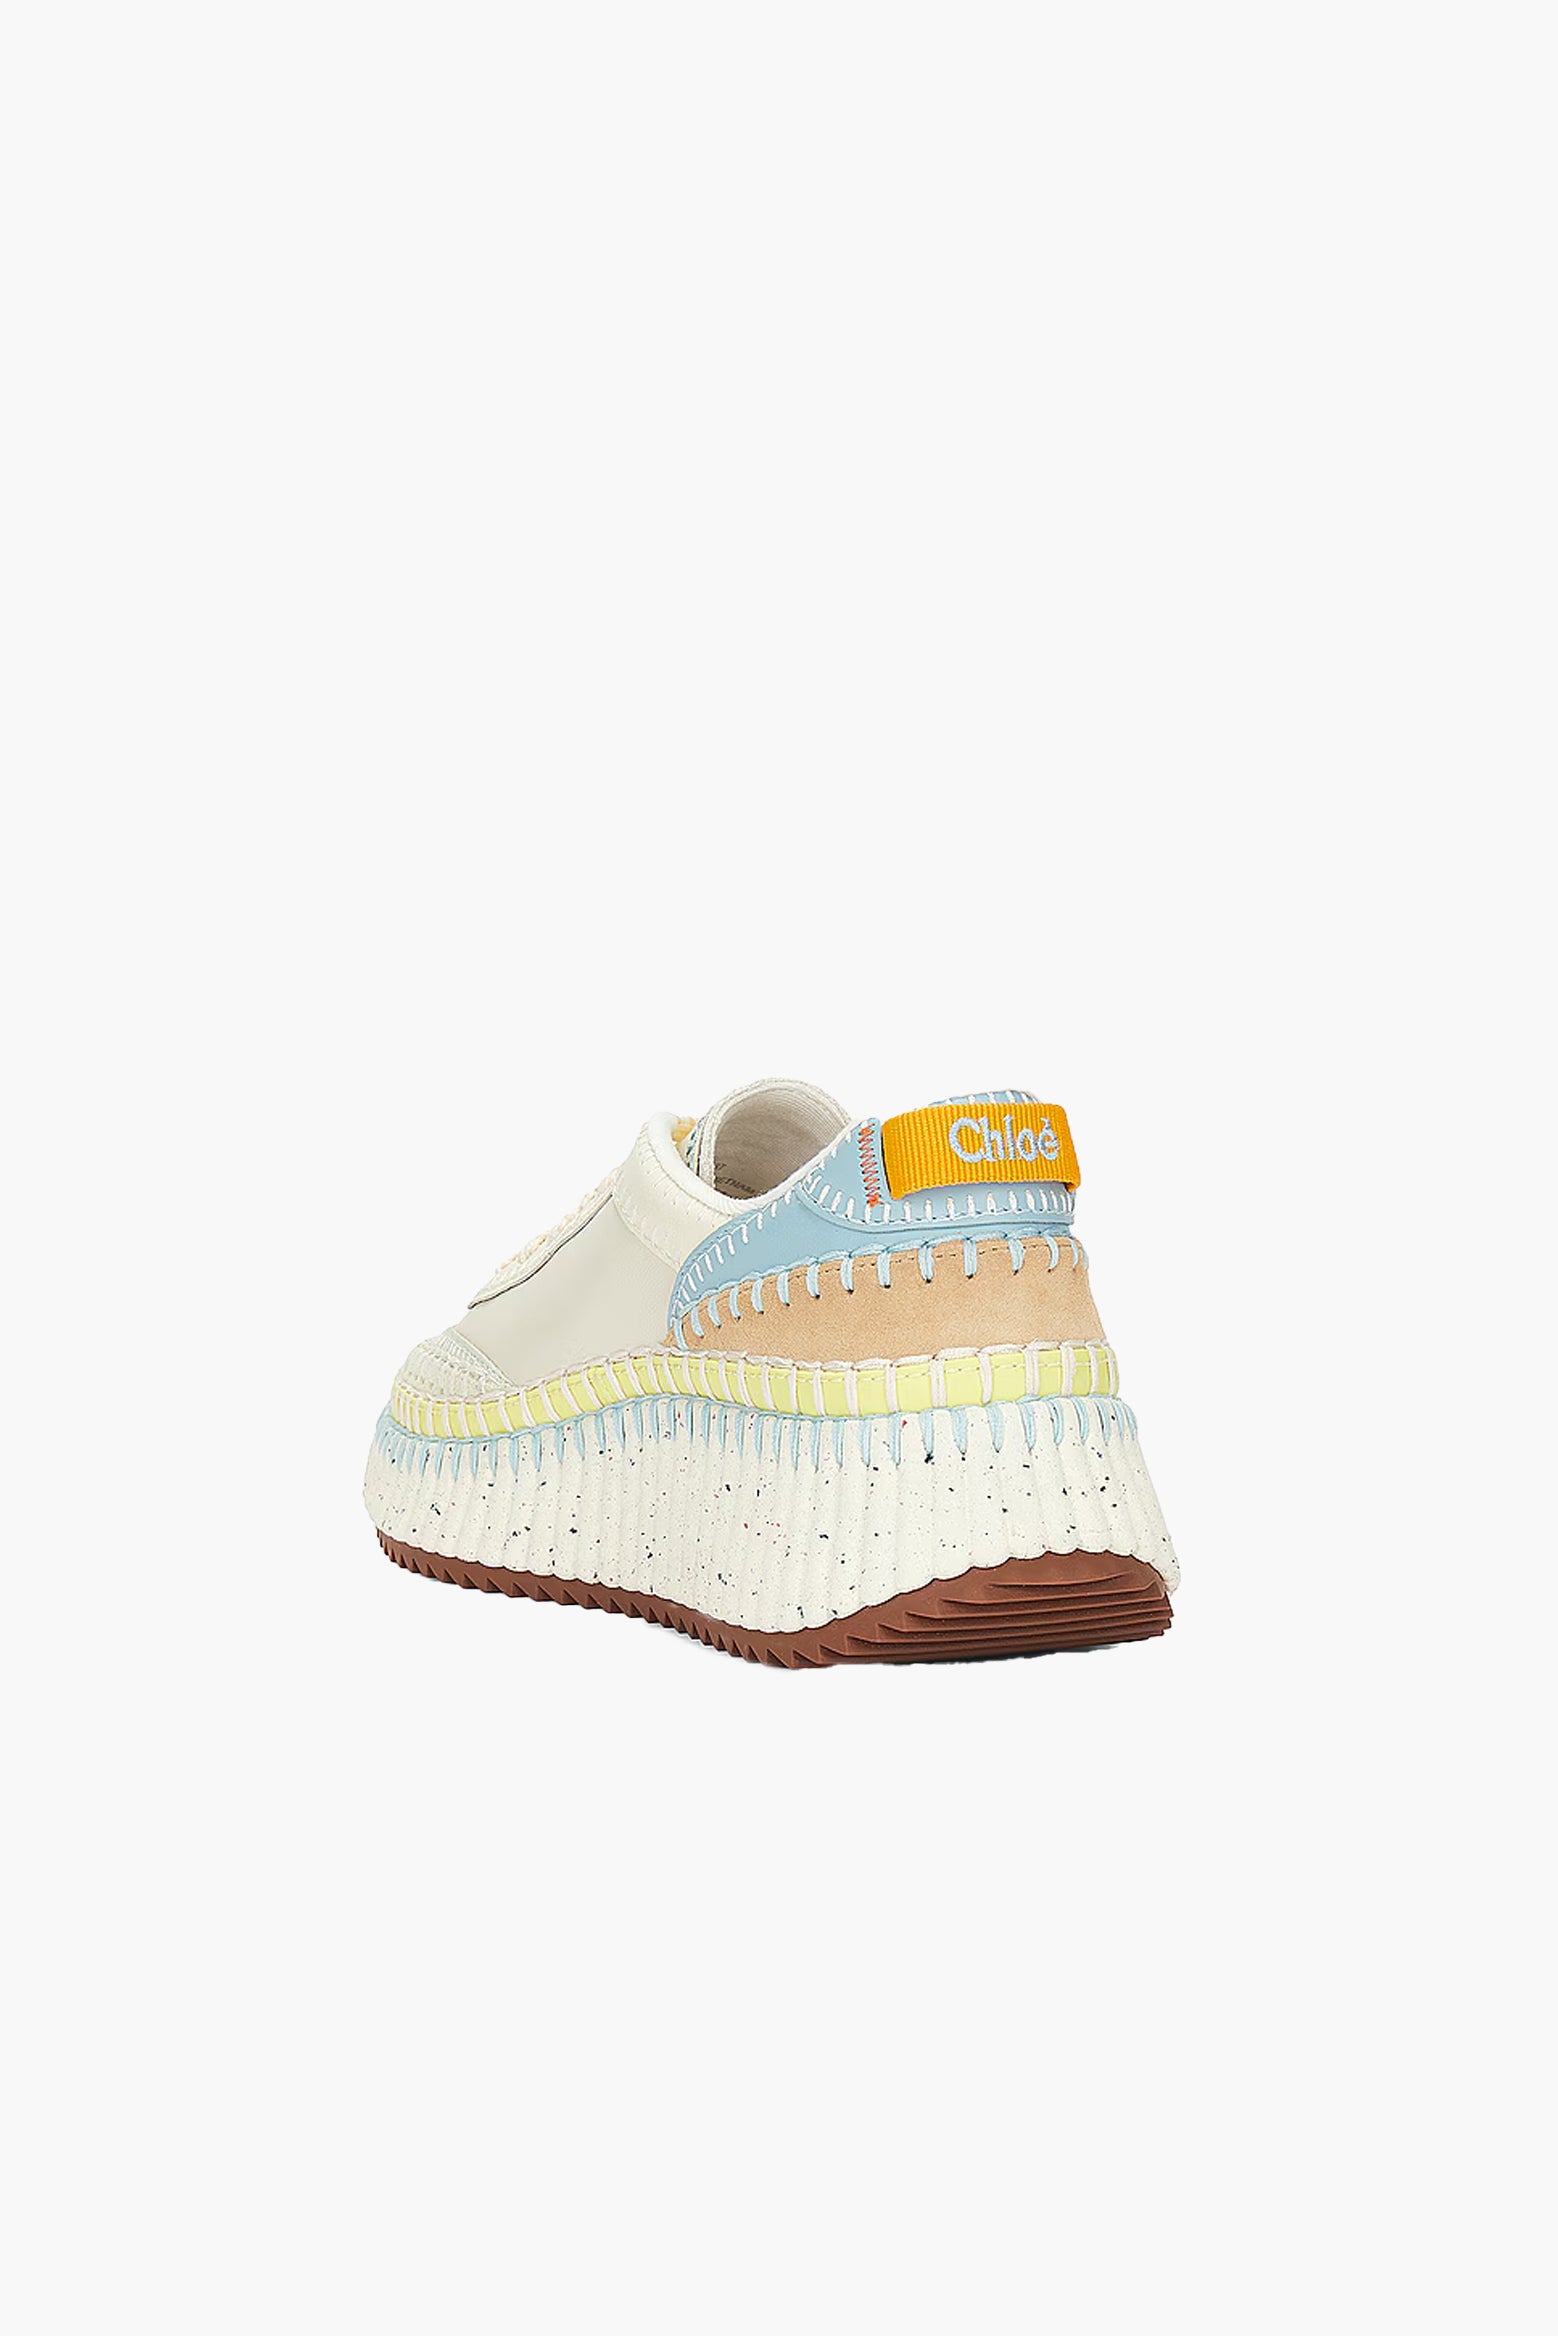 CHLOÉ Nama Sneaker in Cloudy Sky available at The New Trend Australia